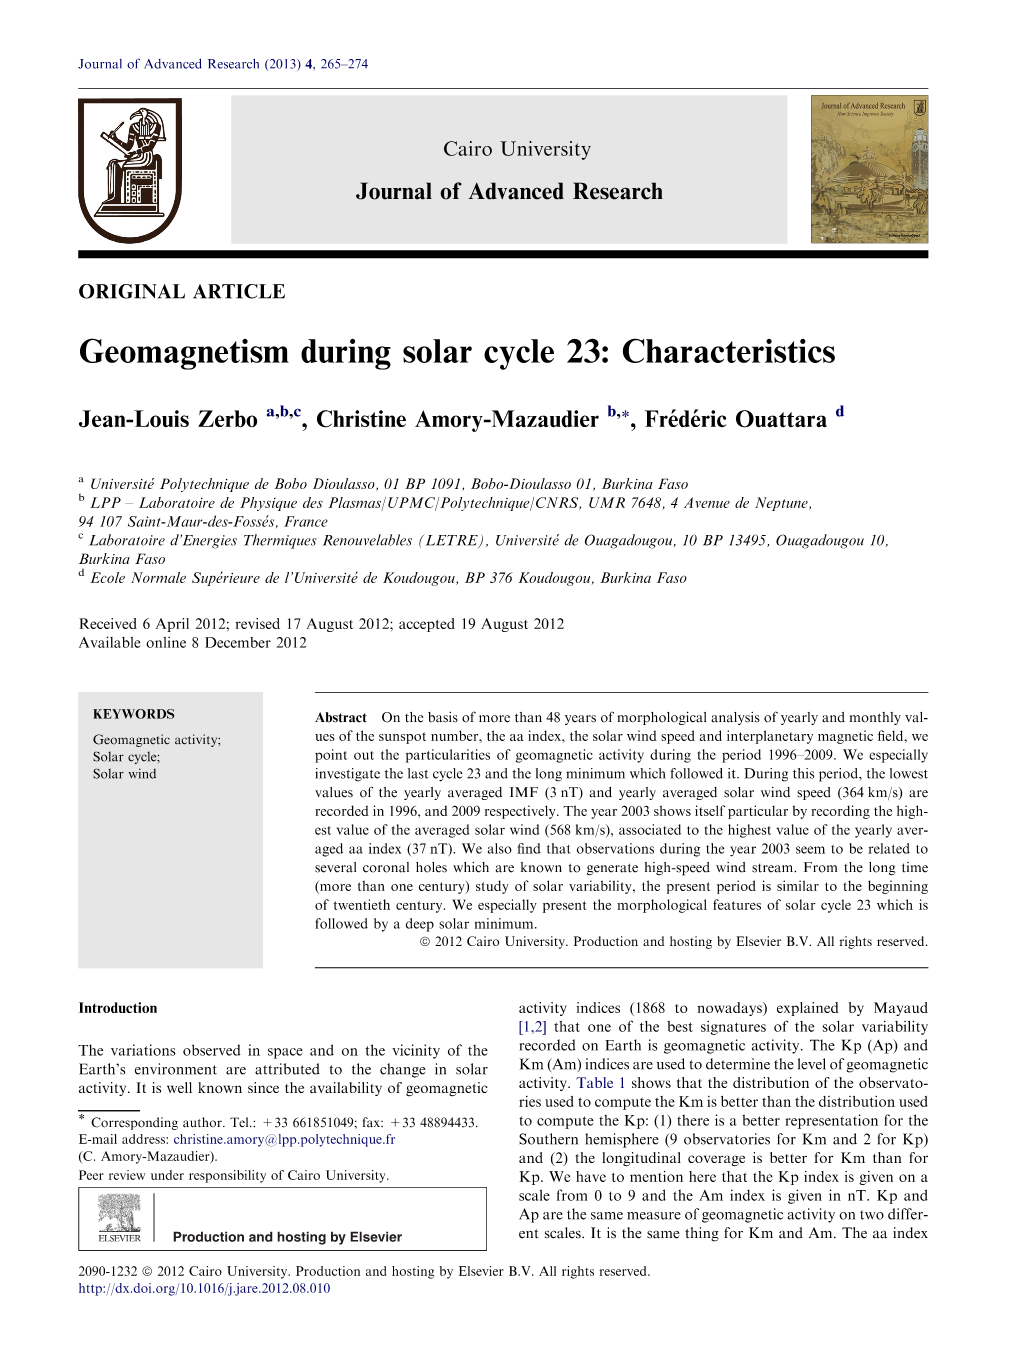 Geomagnetism During Solar Cycle 23: Characteristics